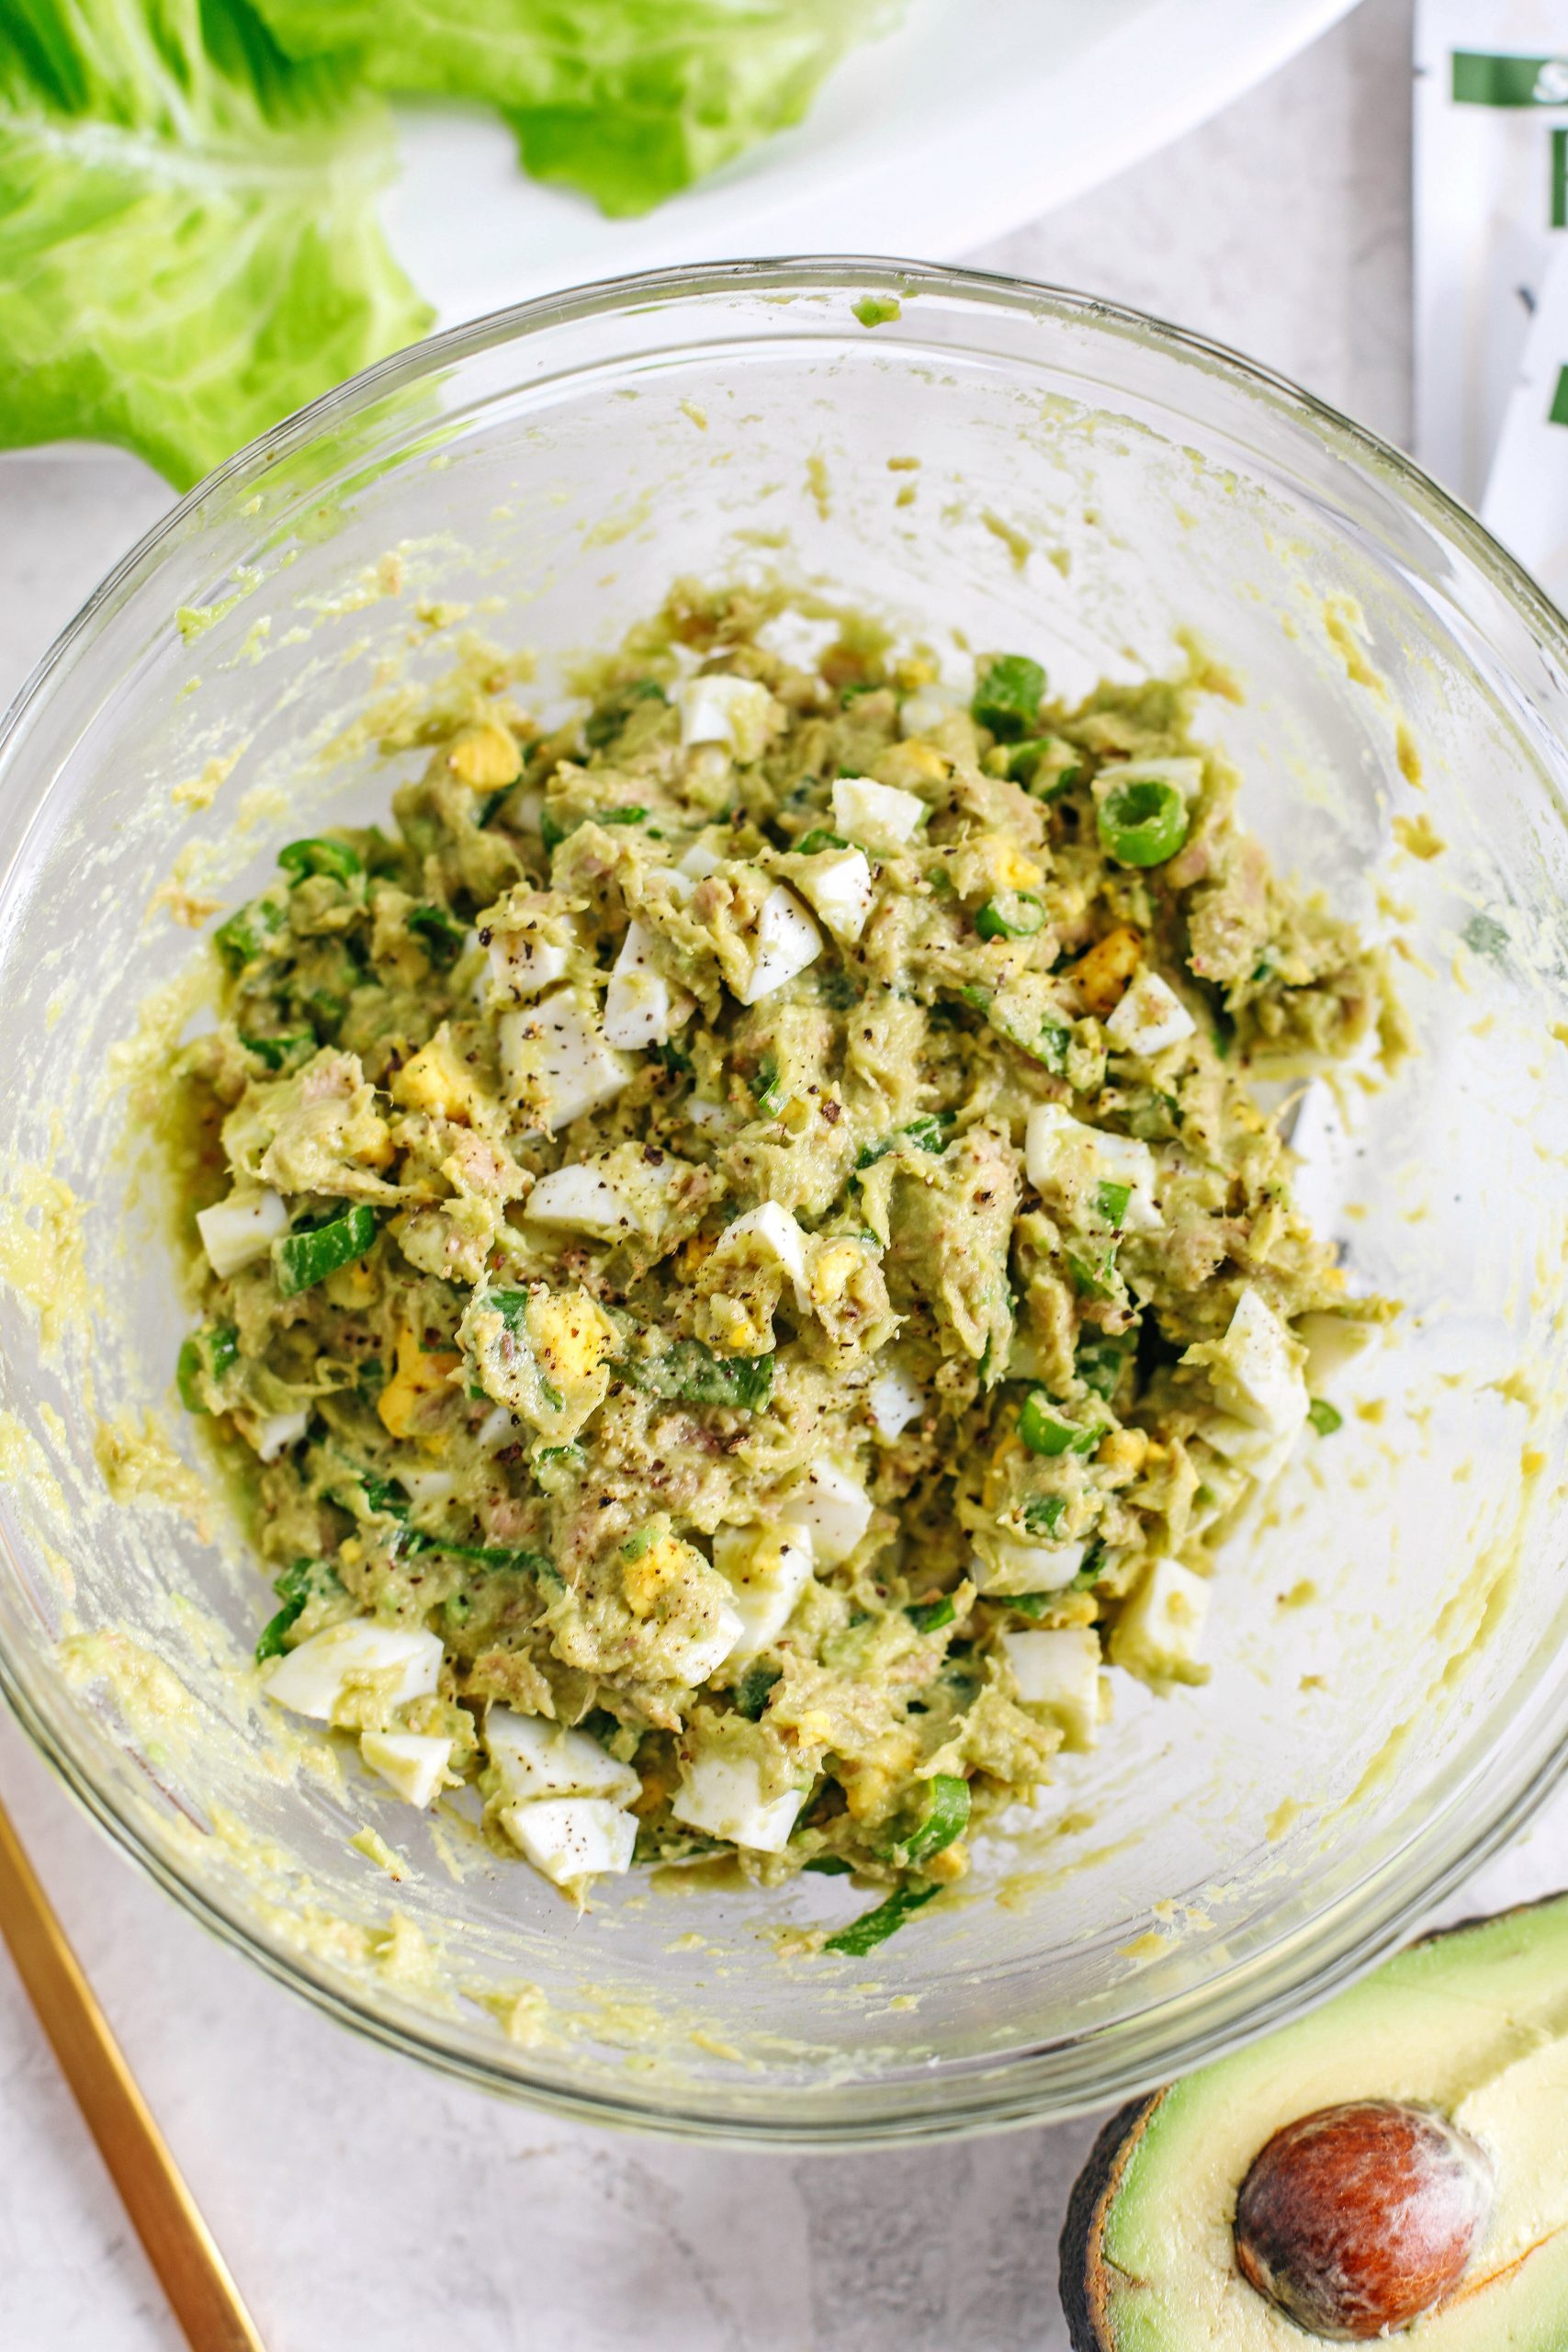 This 5-ingredient Tuna Avocado Egg Salad is fresh, delicious and only takes about 5 minutes to throw together for a healthy, protein-packed meal!  No mayo necessary!